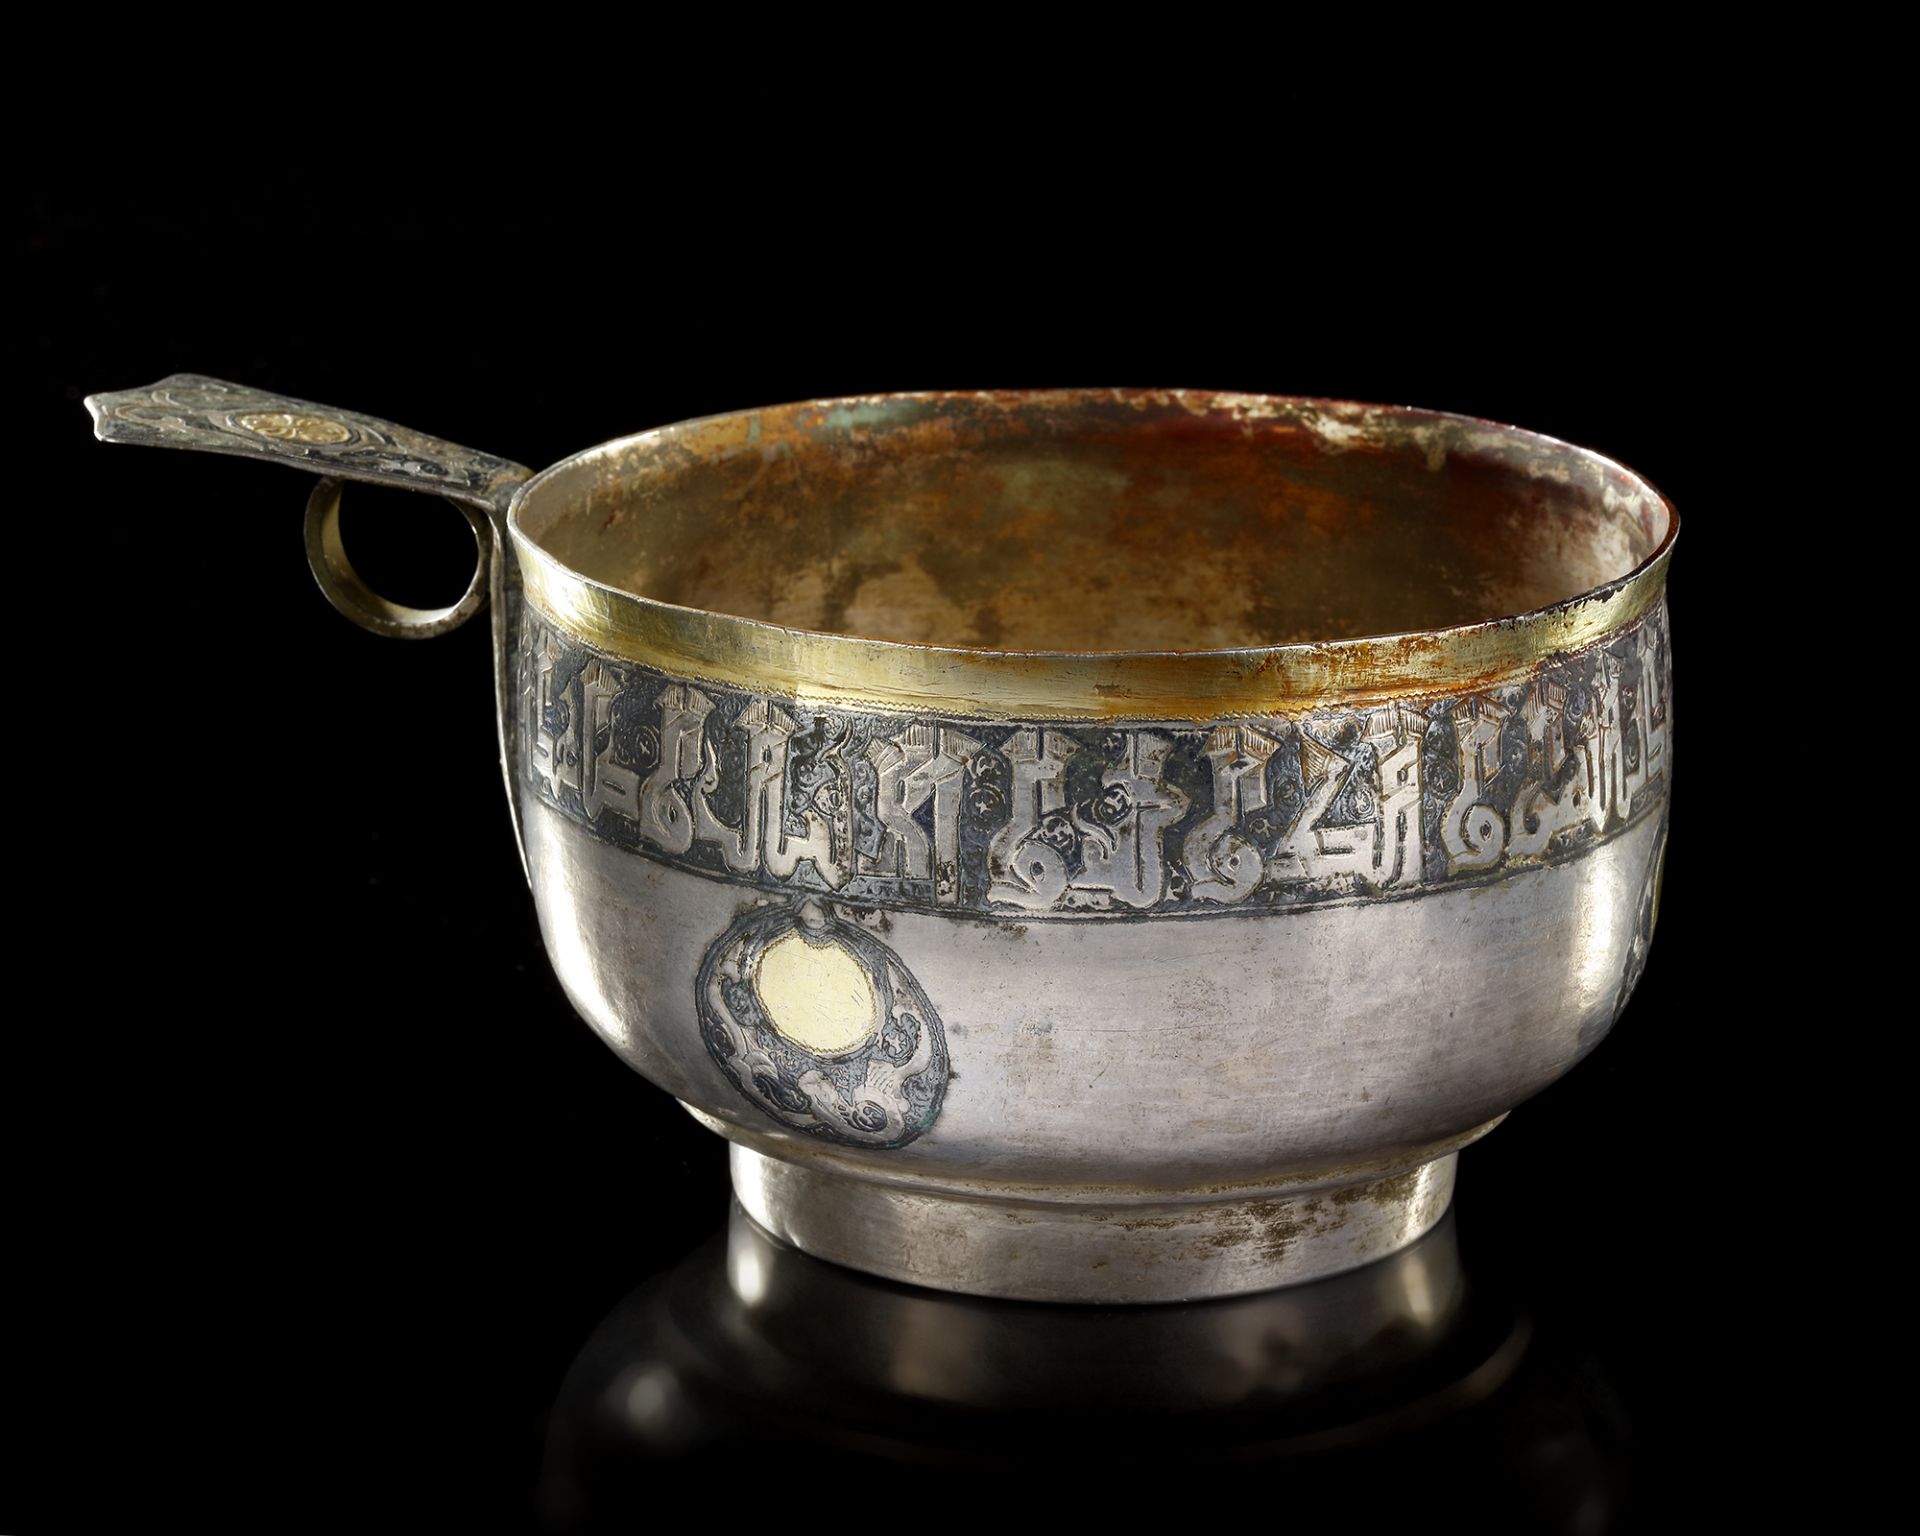 A RARE SILVER AND NIELLOED CUP WITH KUFIC INSCRIPTION, PERSIA OR CENTRAL ASIA, 11TH-12TH CENTURY - Image 13 of 34